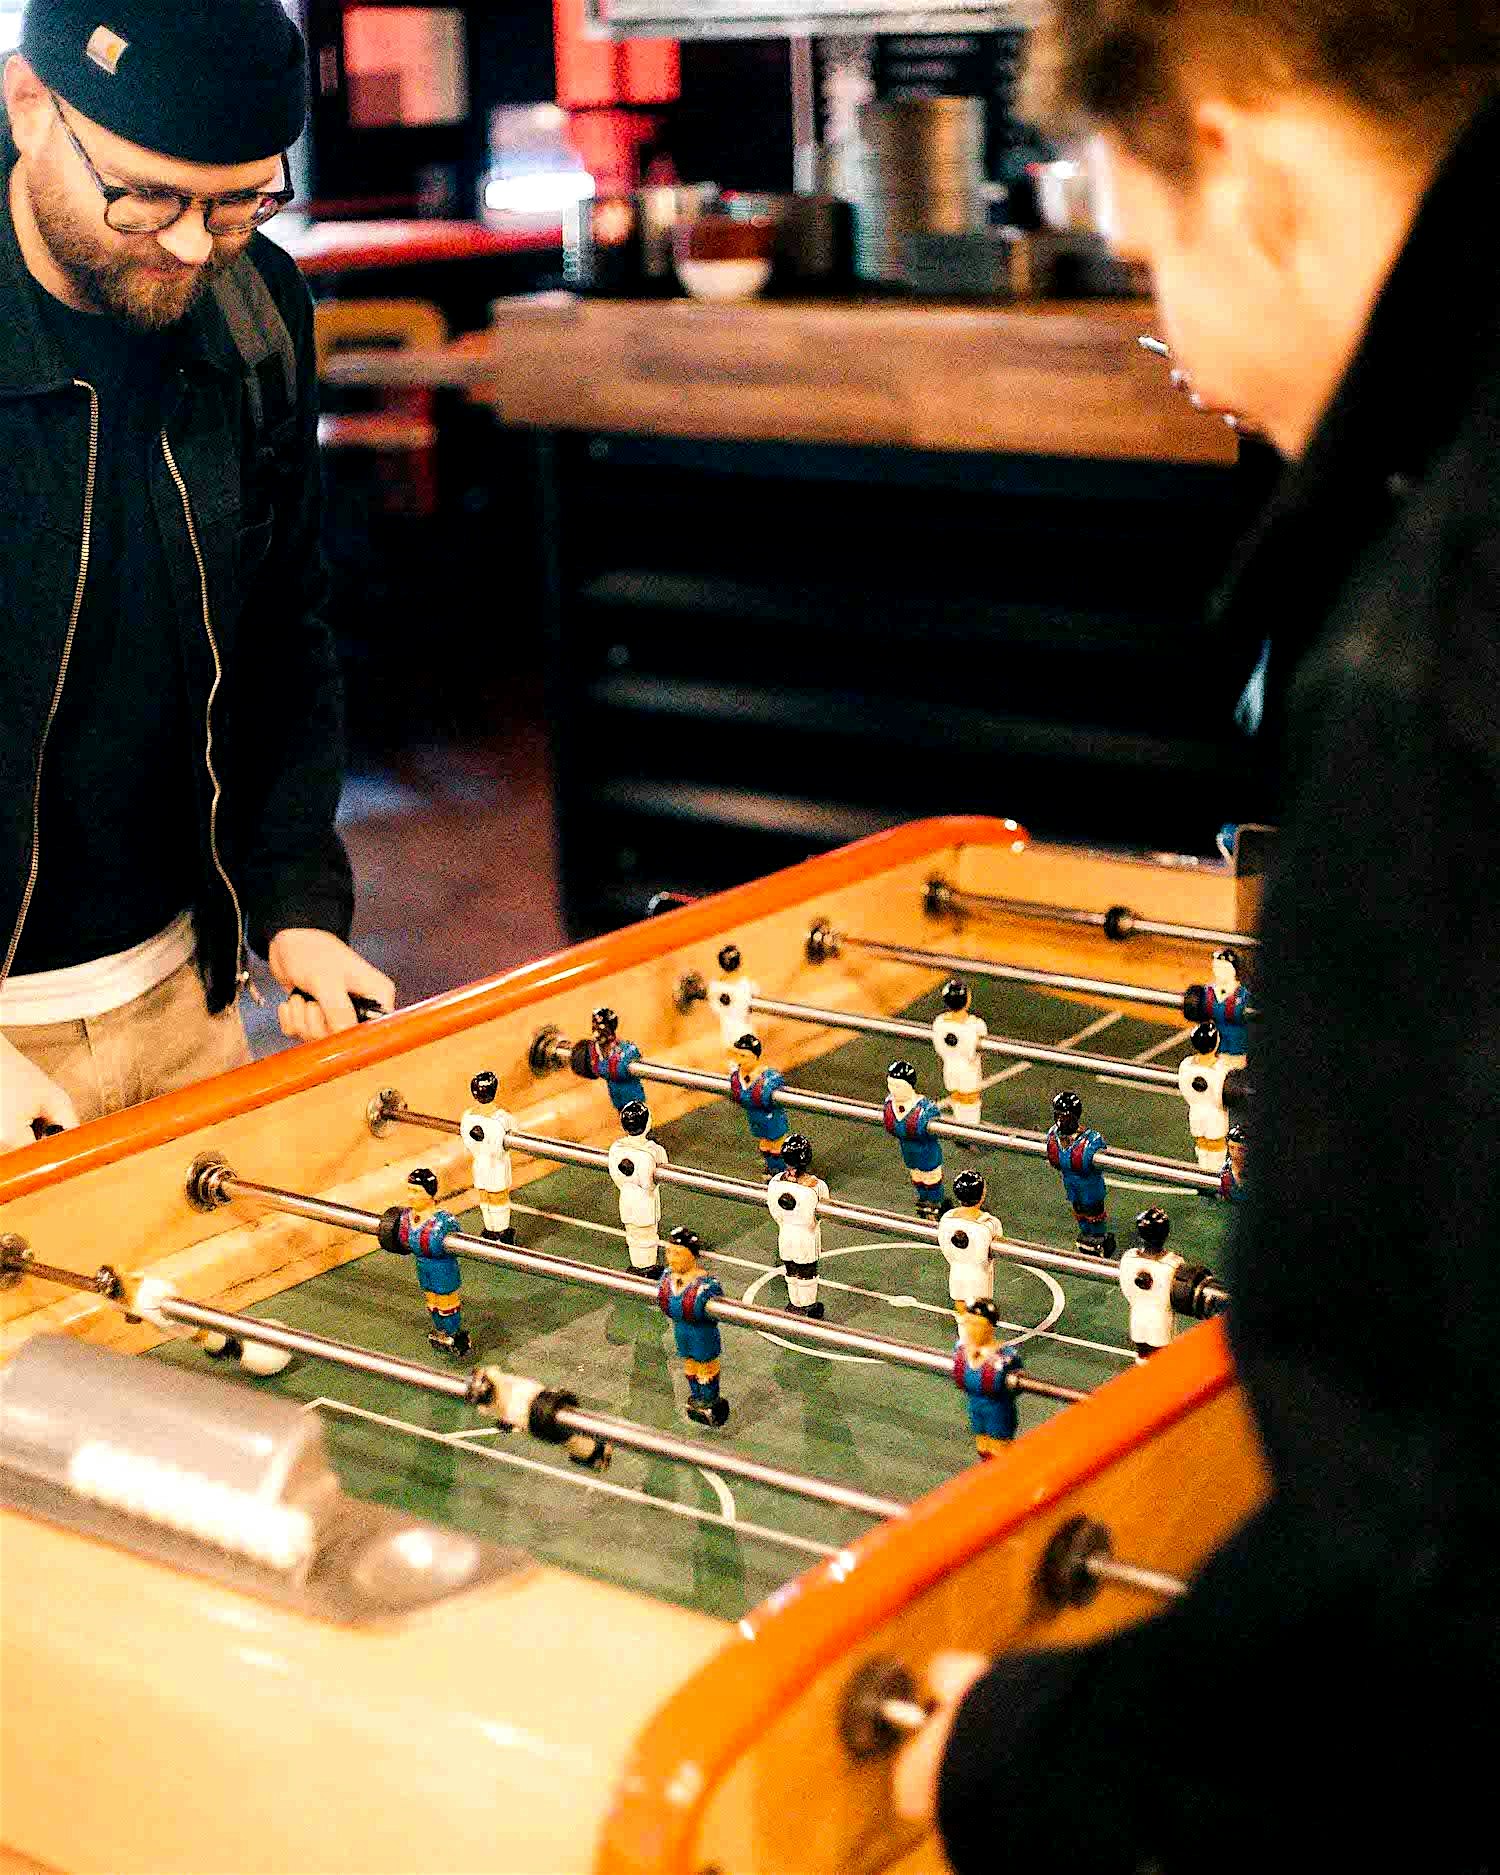 Two men play table football at a bar in Shoreditch